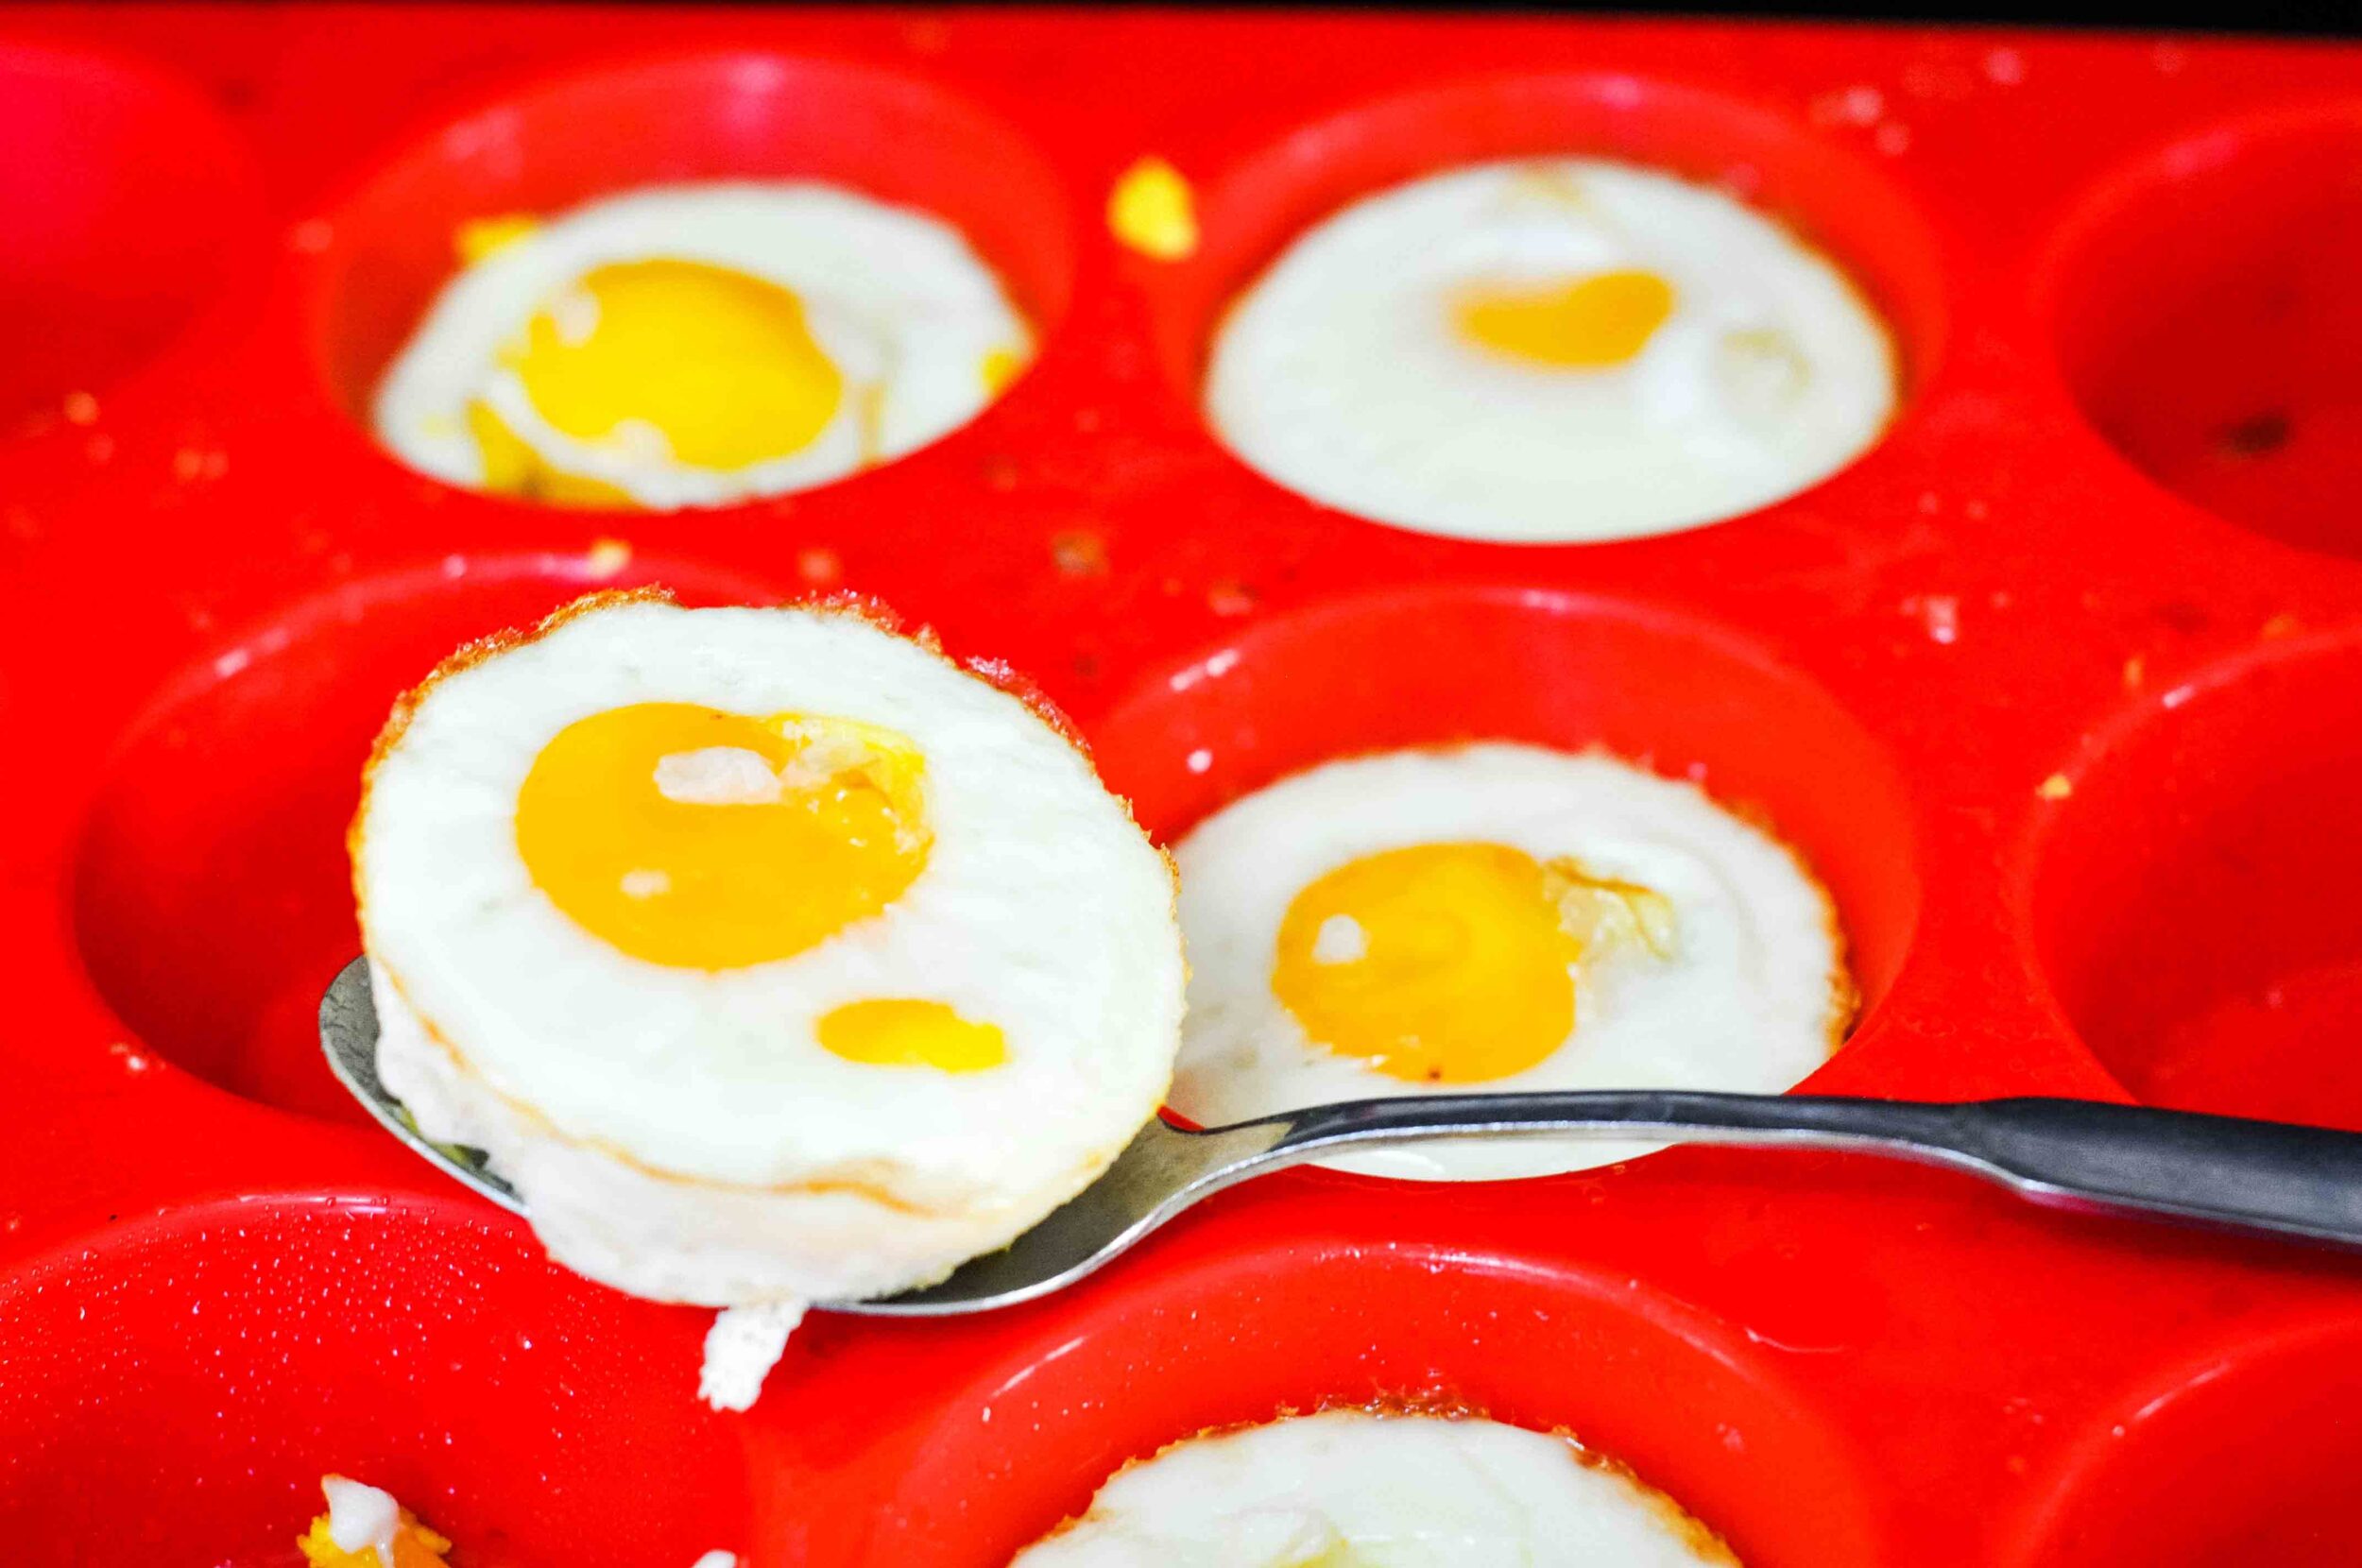 Baked eggs in a muffin tin